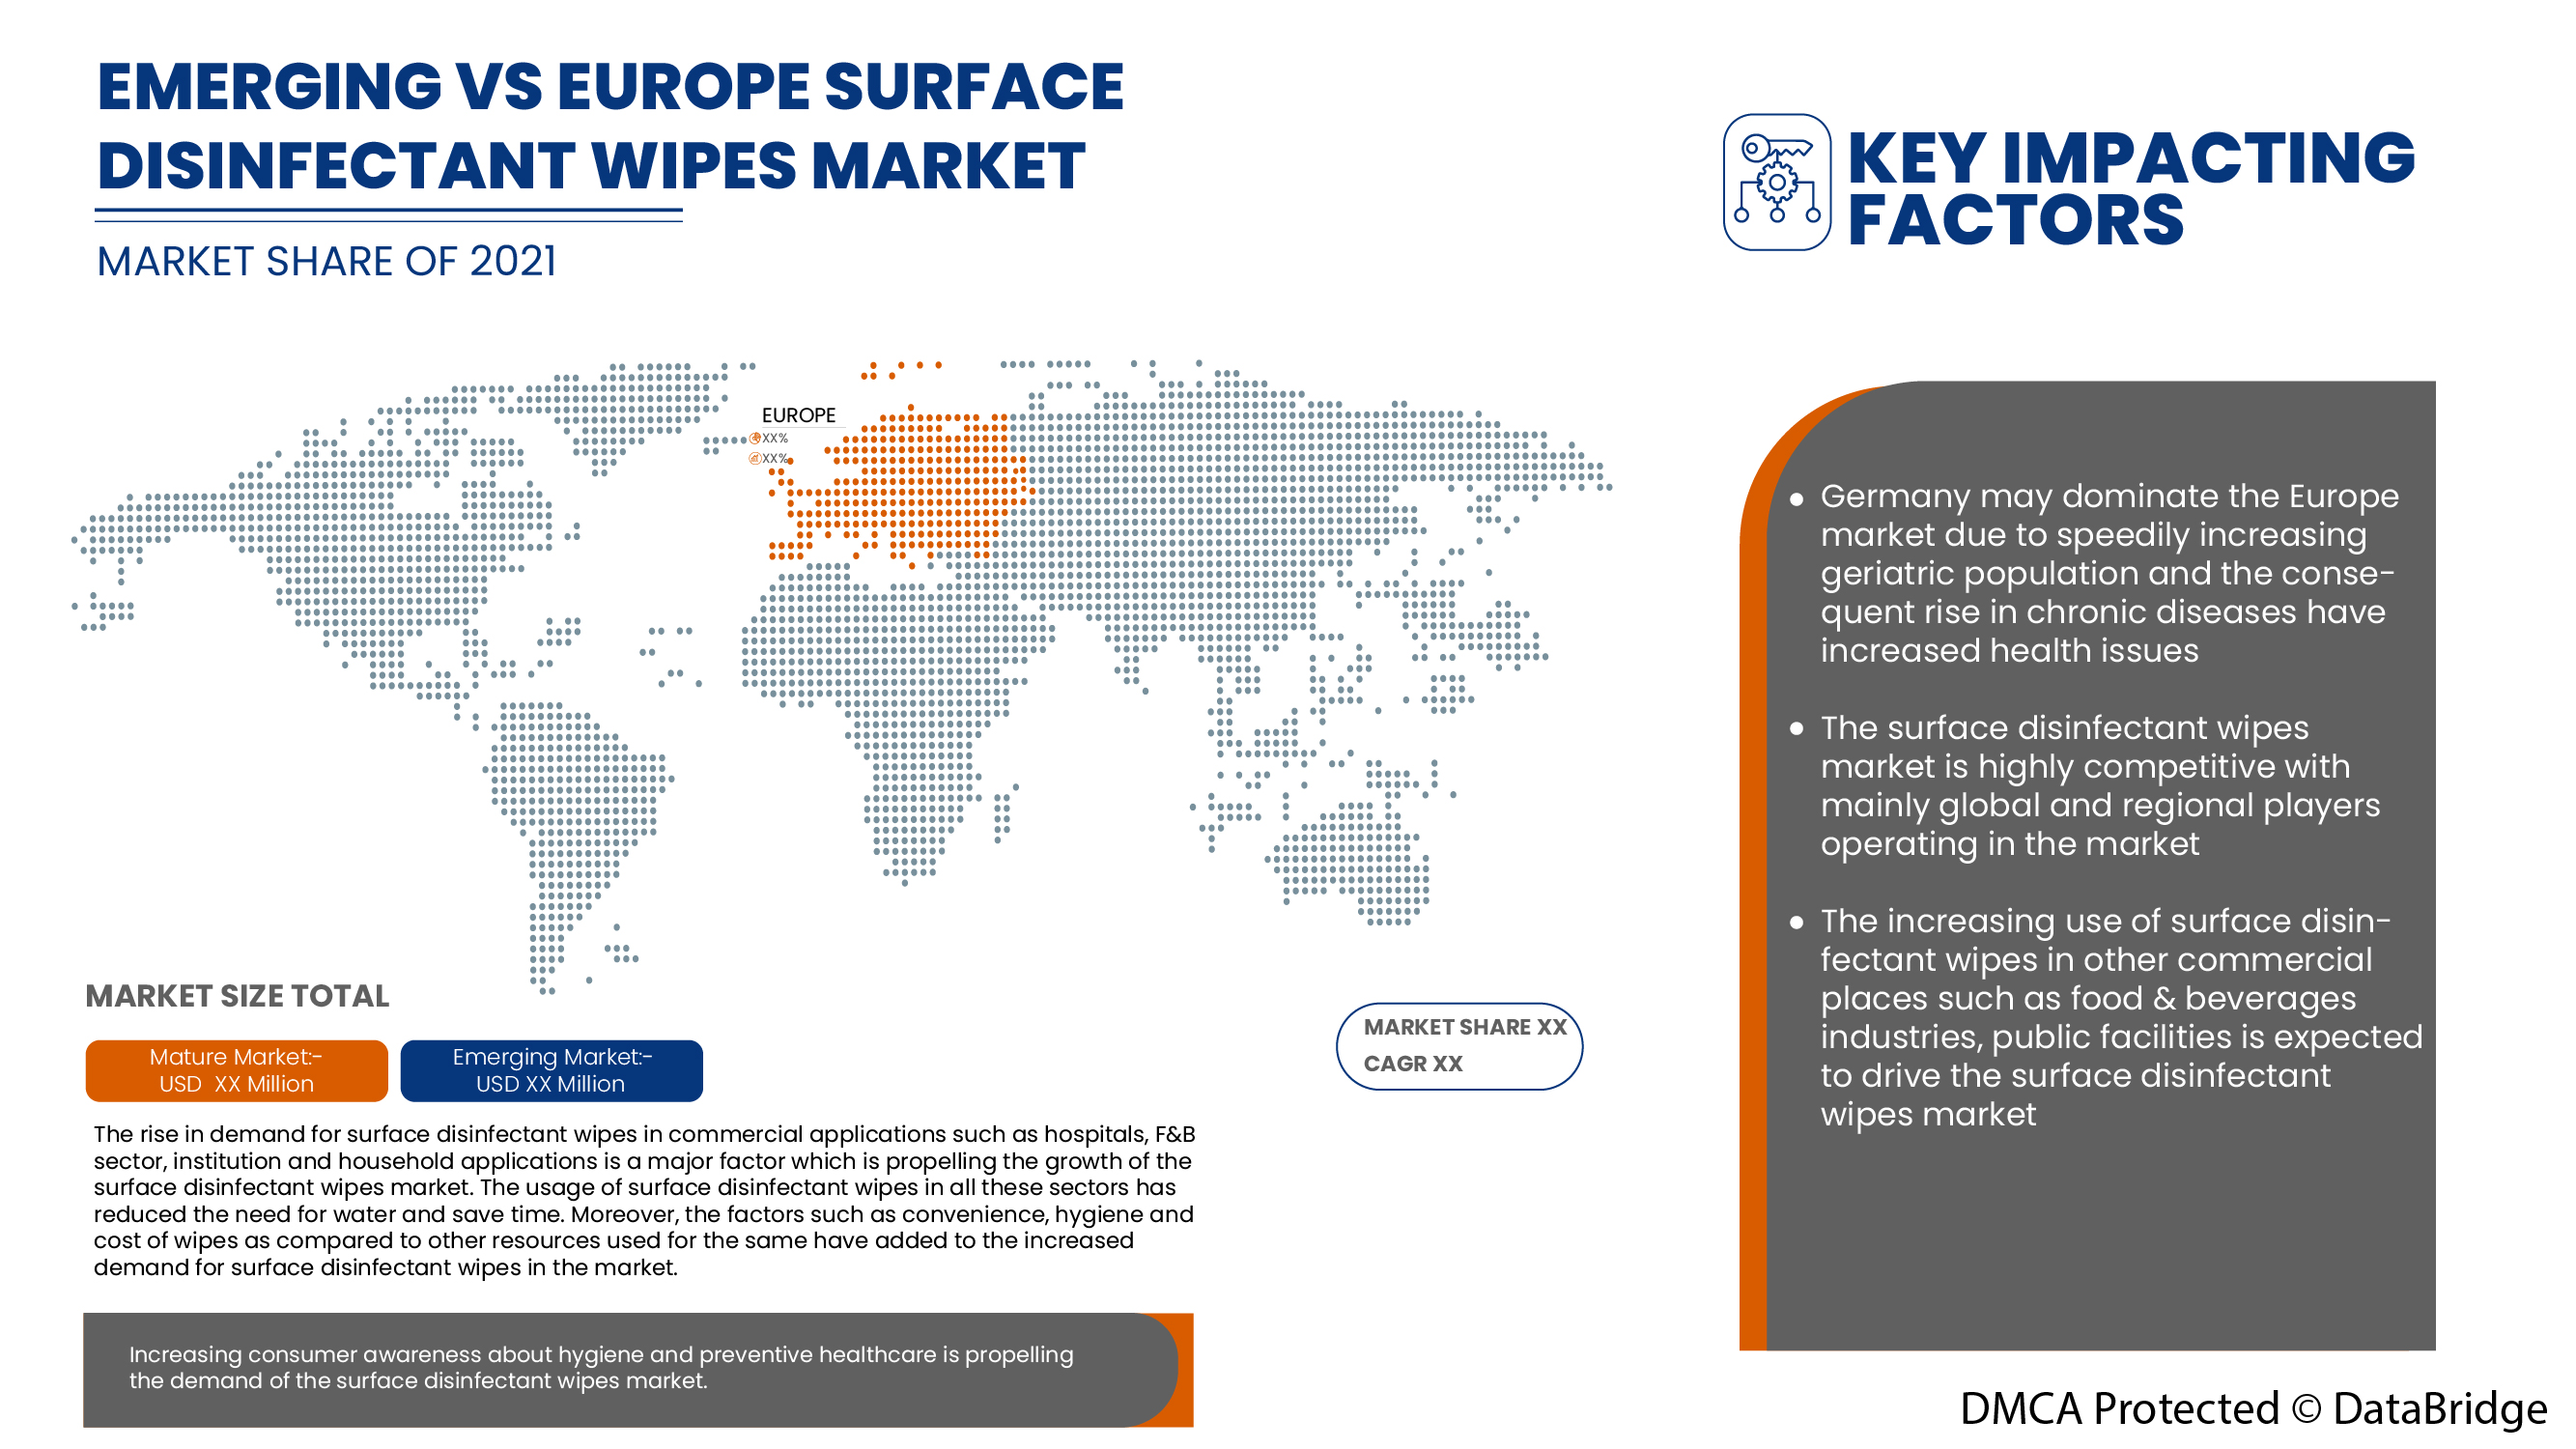 Europe Surface Disinfectant Wipes Market